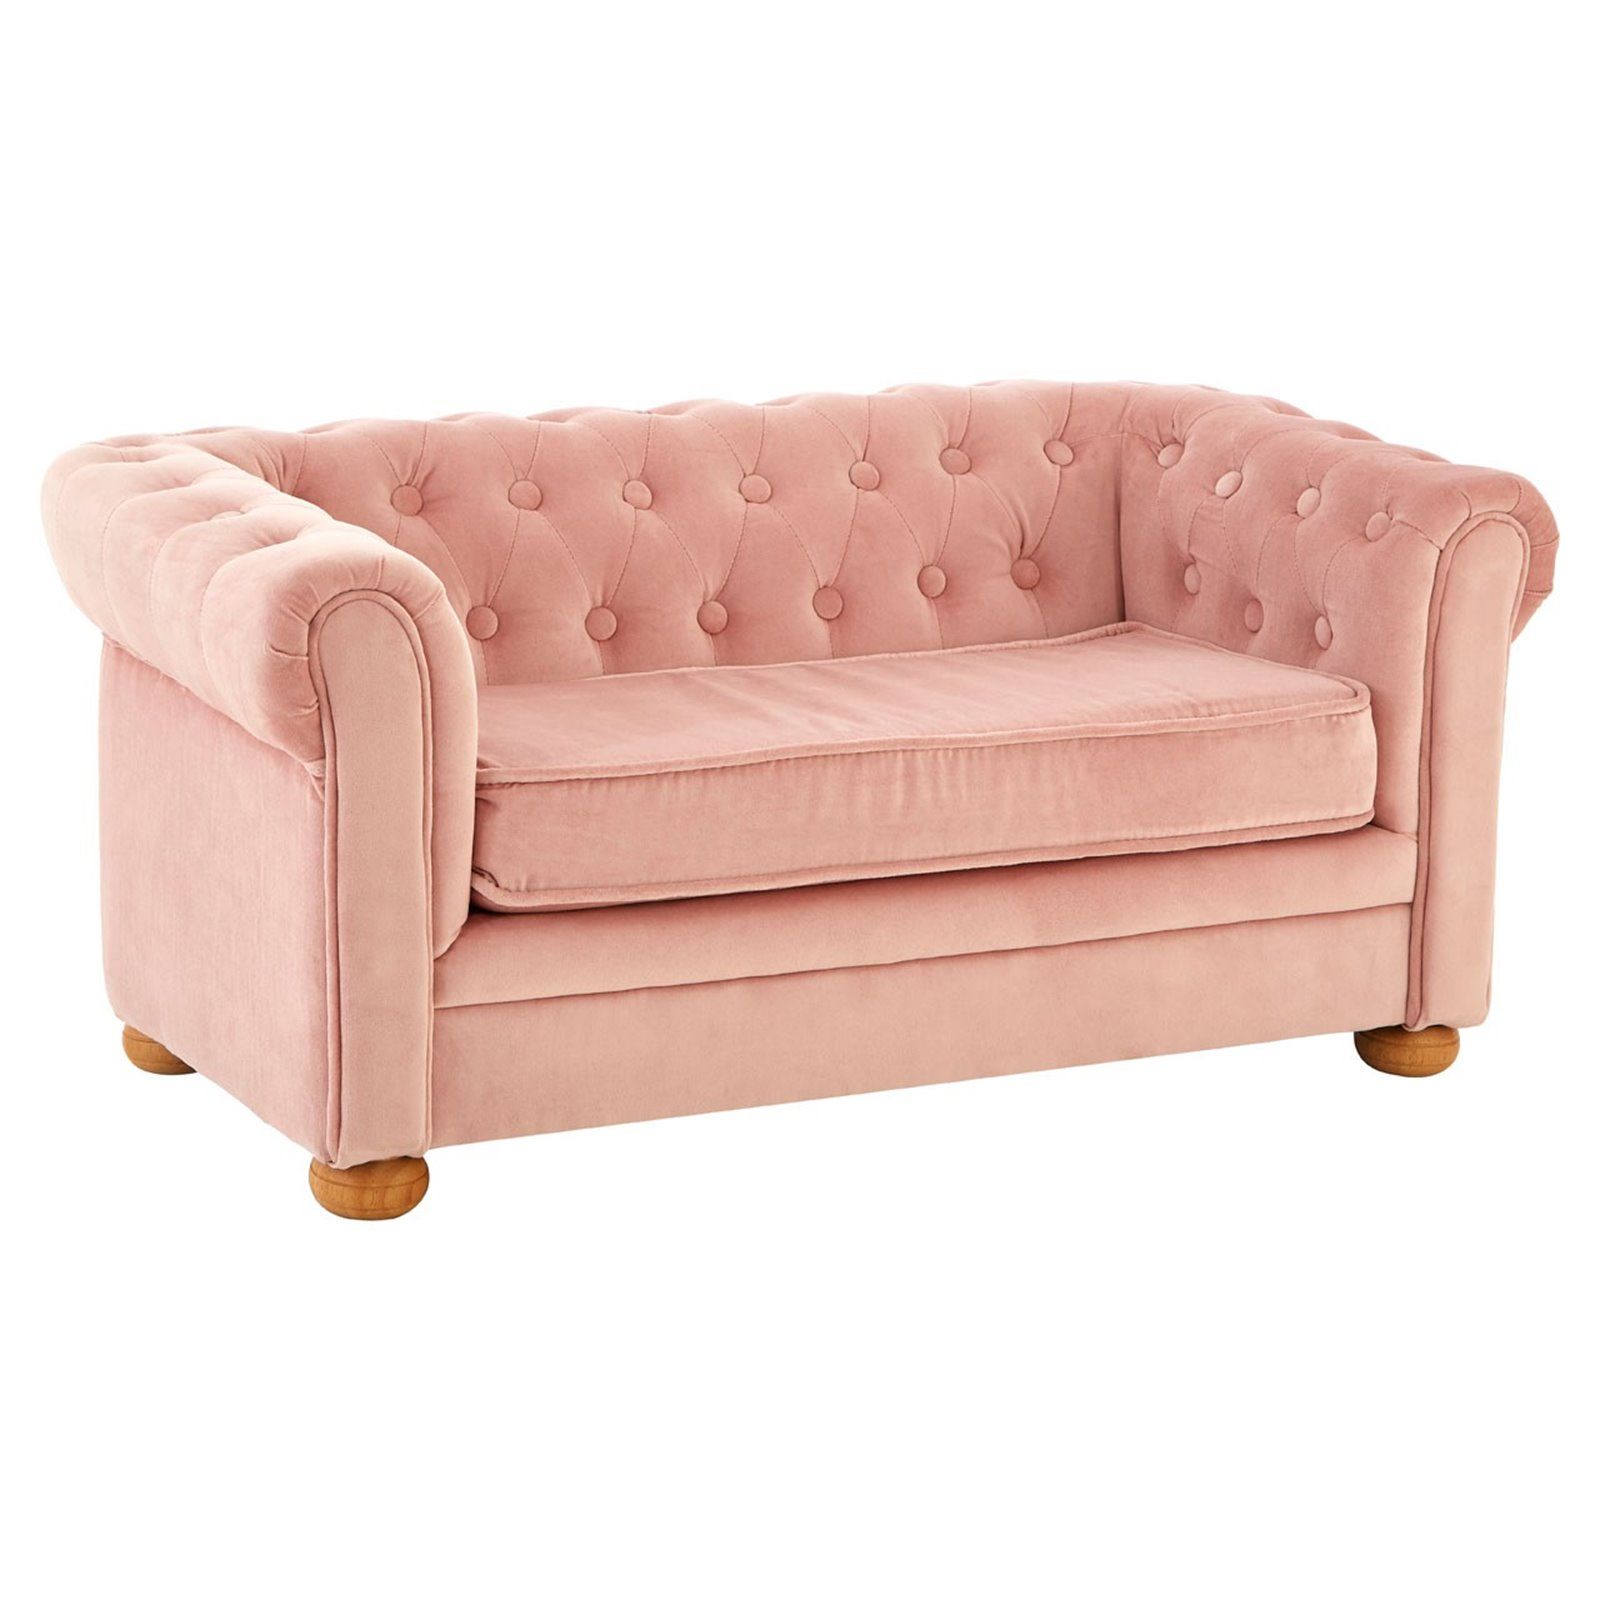 Pink Child's Chesterfield Sofa With Children's Sofa Beds (View 17 of 20)